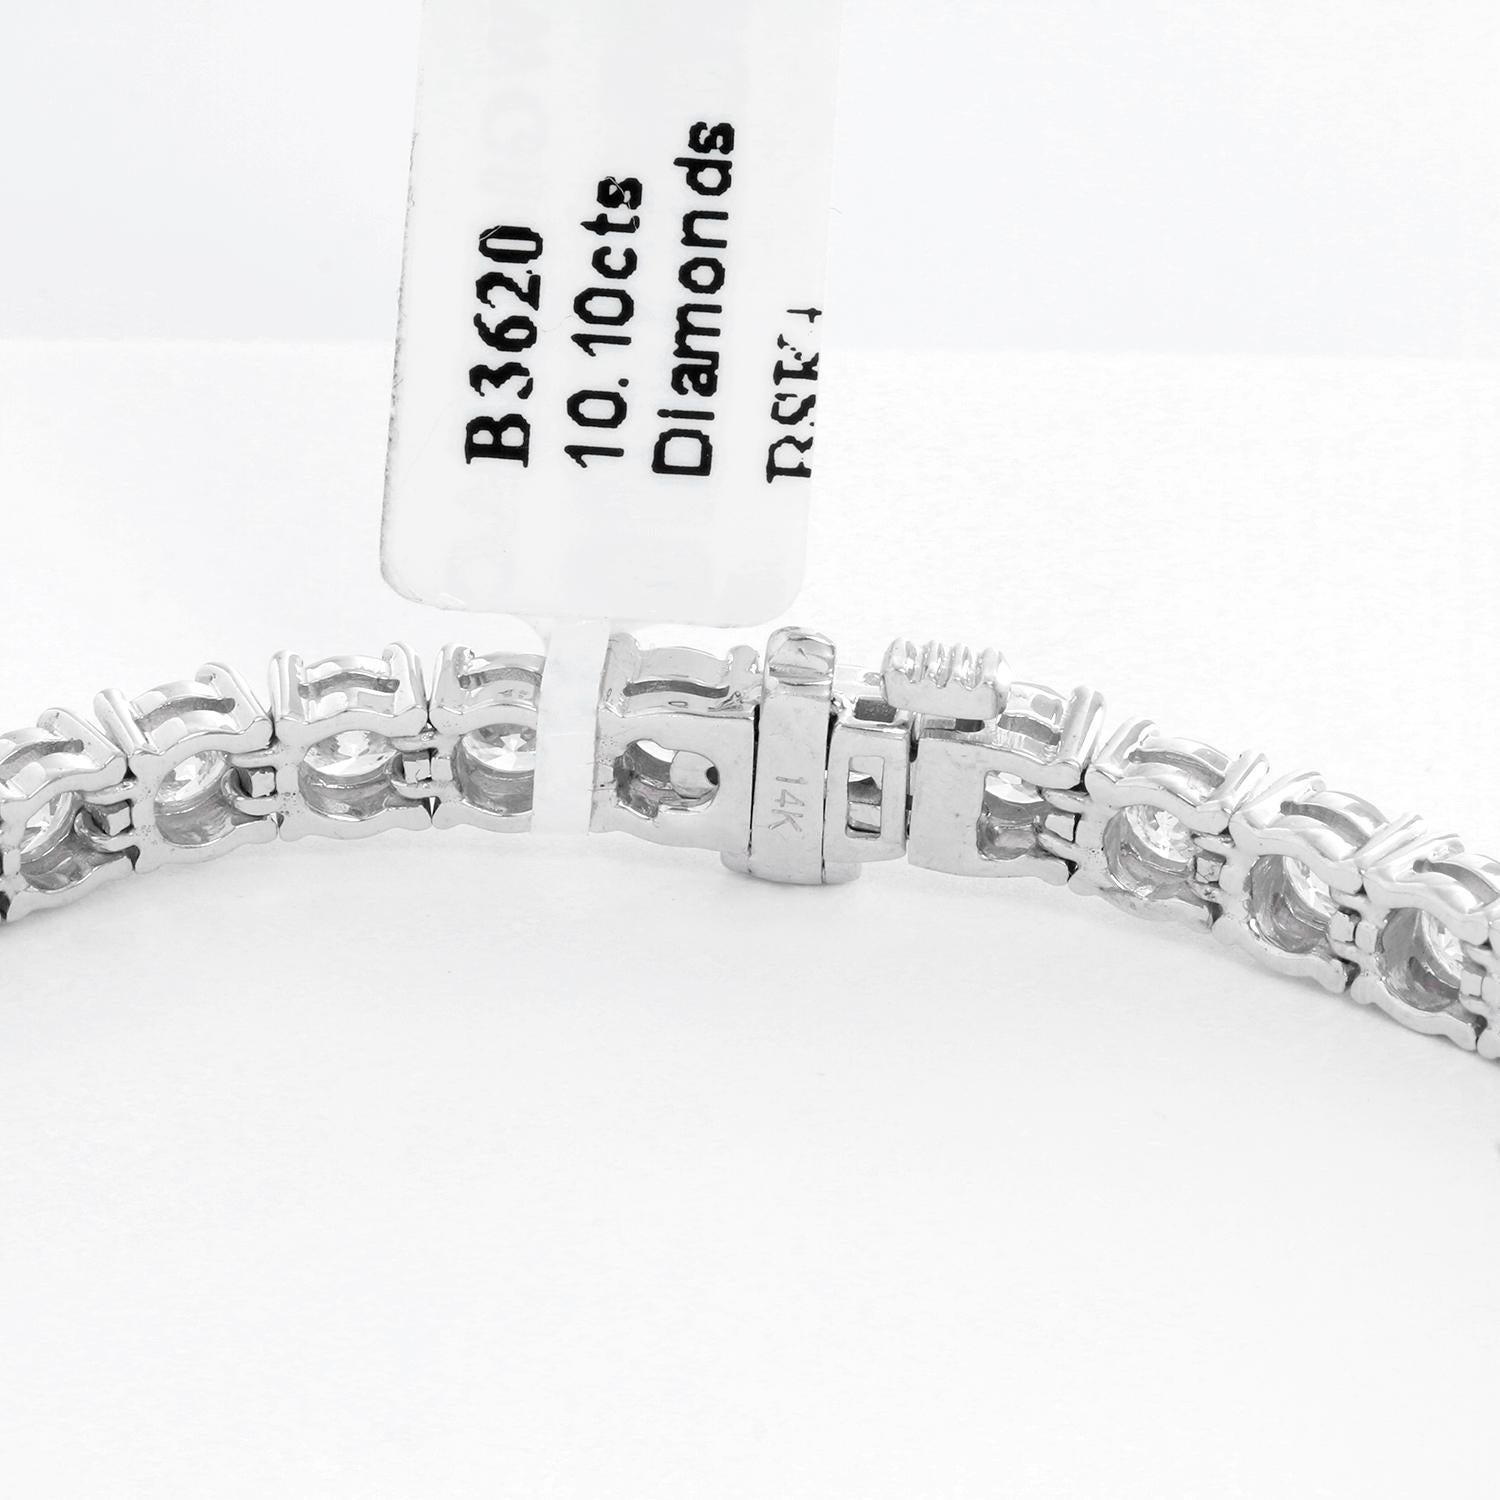 Beautiful 14k White Gold and 10.10 ct. Diamond Tennis Bracelet - This beautiful bracelet features 10.10 carats of round brilliant cut diamonds (GH-color, SI2-SI3 clarity) set in 14k white gold. Bracelet measures apx. 7-inches in length. Total weight